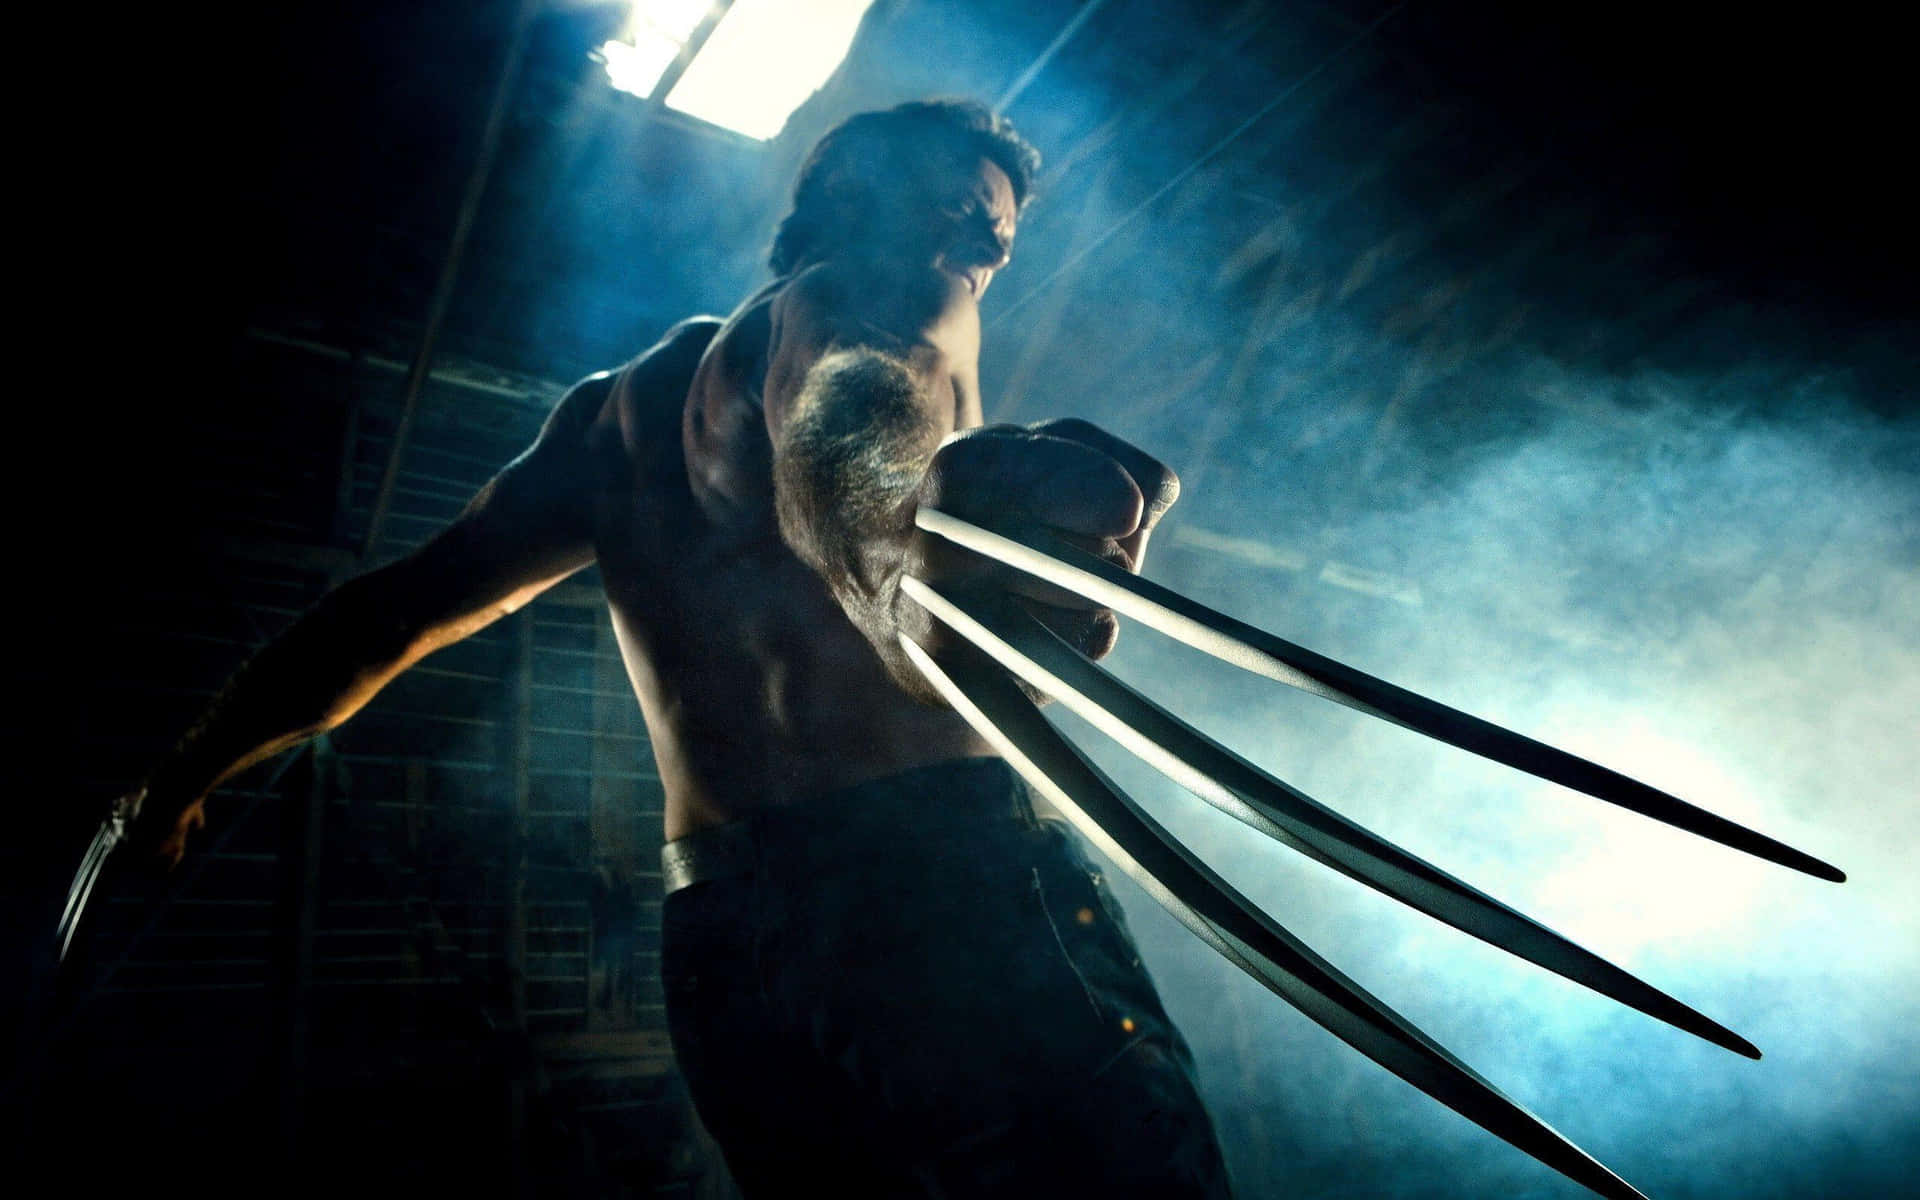 Wolverine sinks his claws into justice